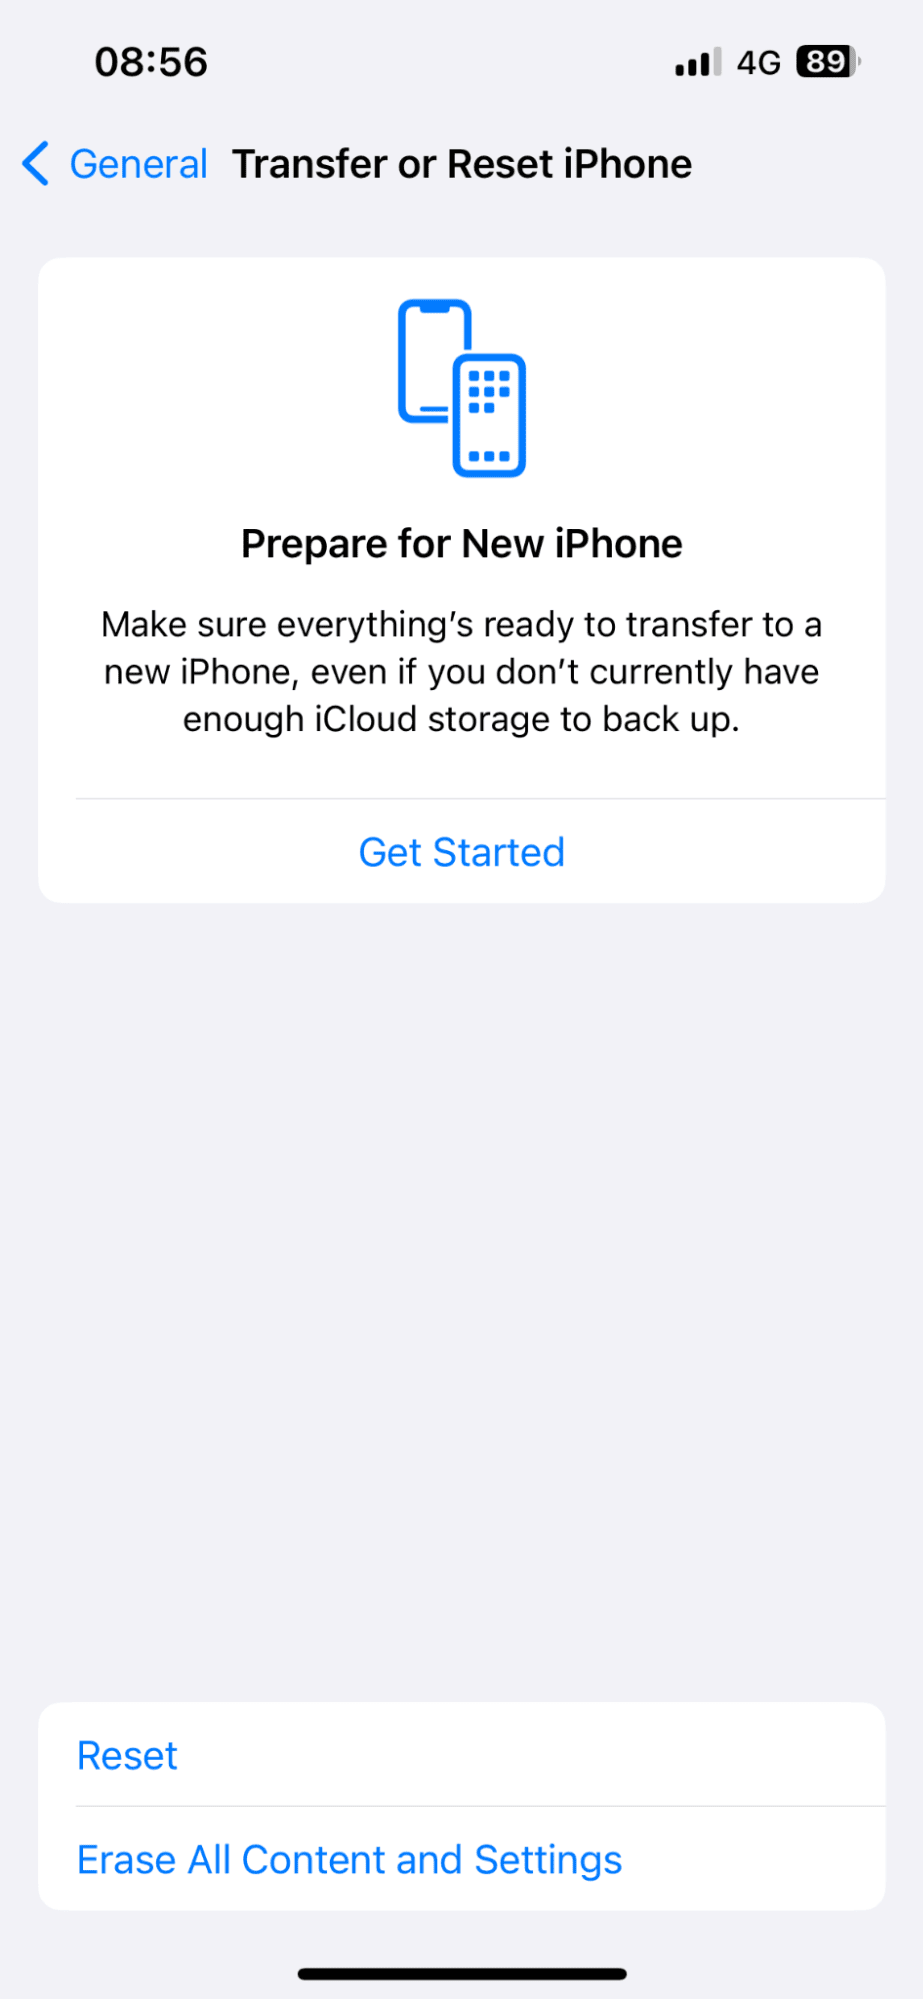 Transfer or Reset iPhone